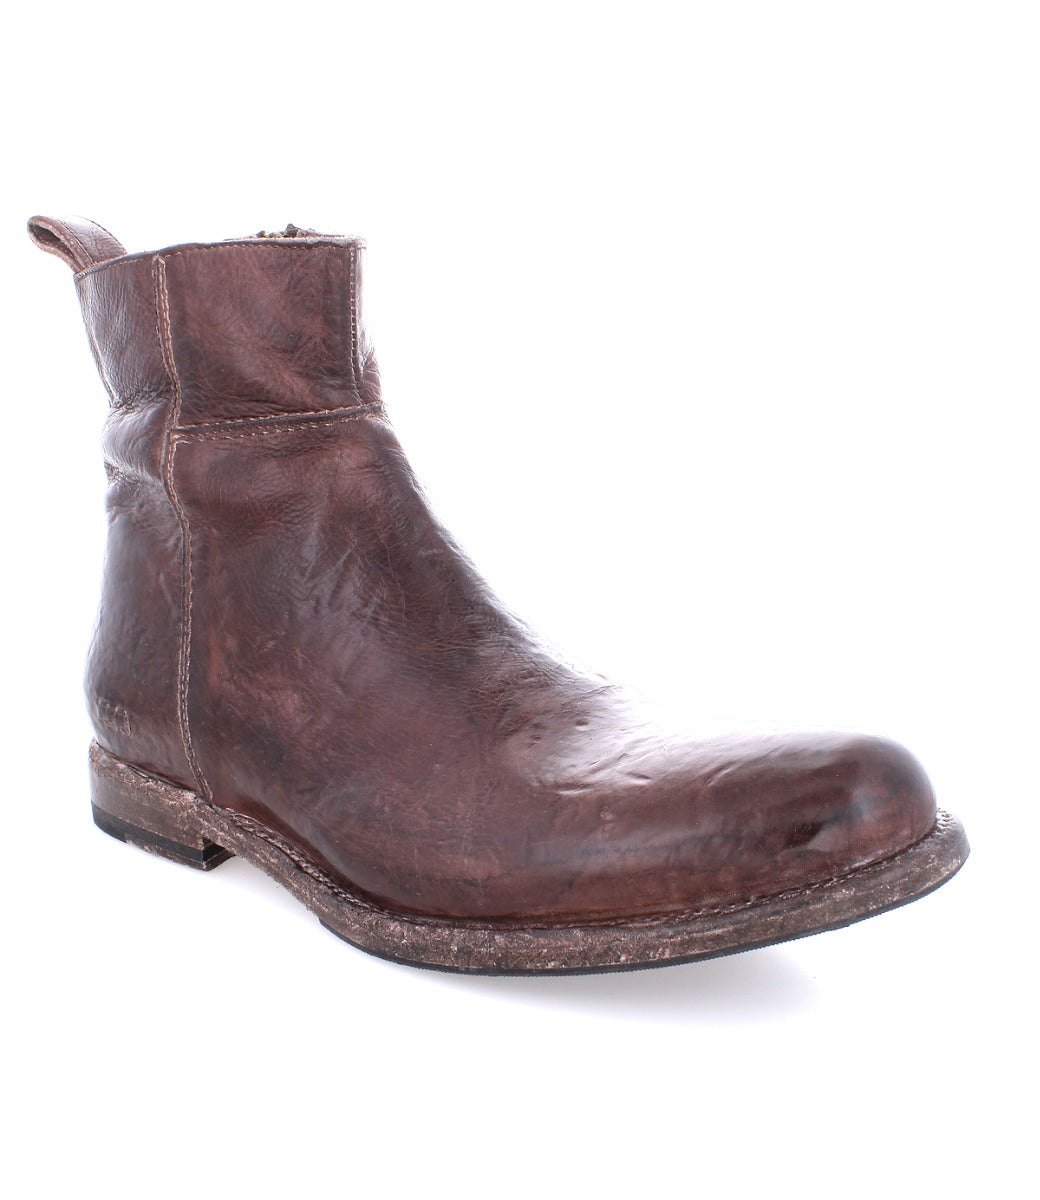 A Bed Stu Kaldi, teak leather ankle boot with a zipper on the side.